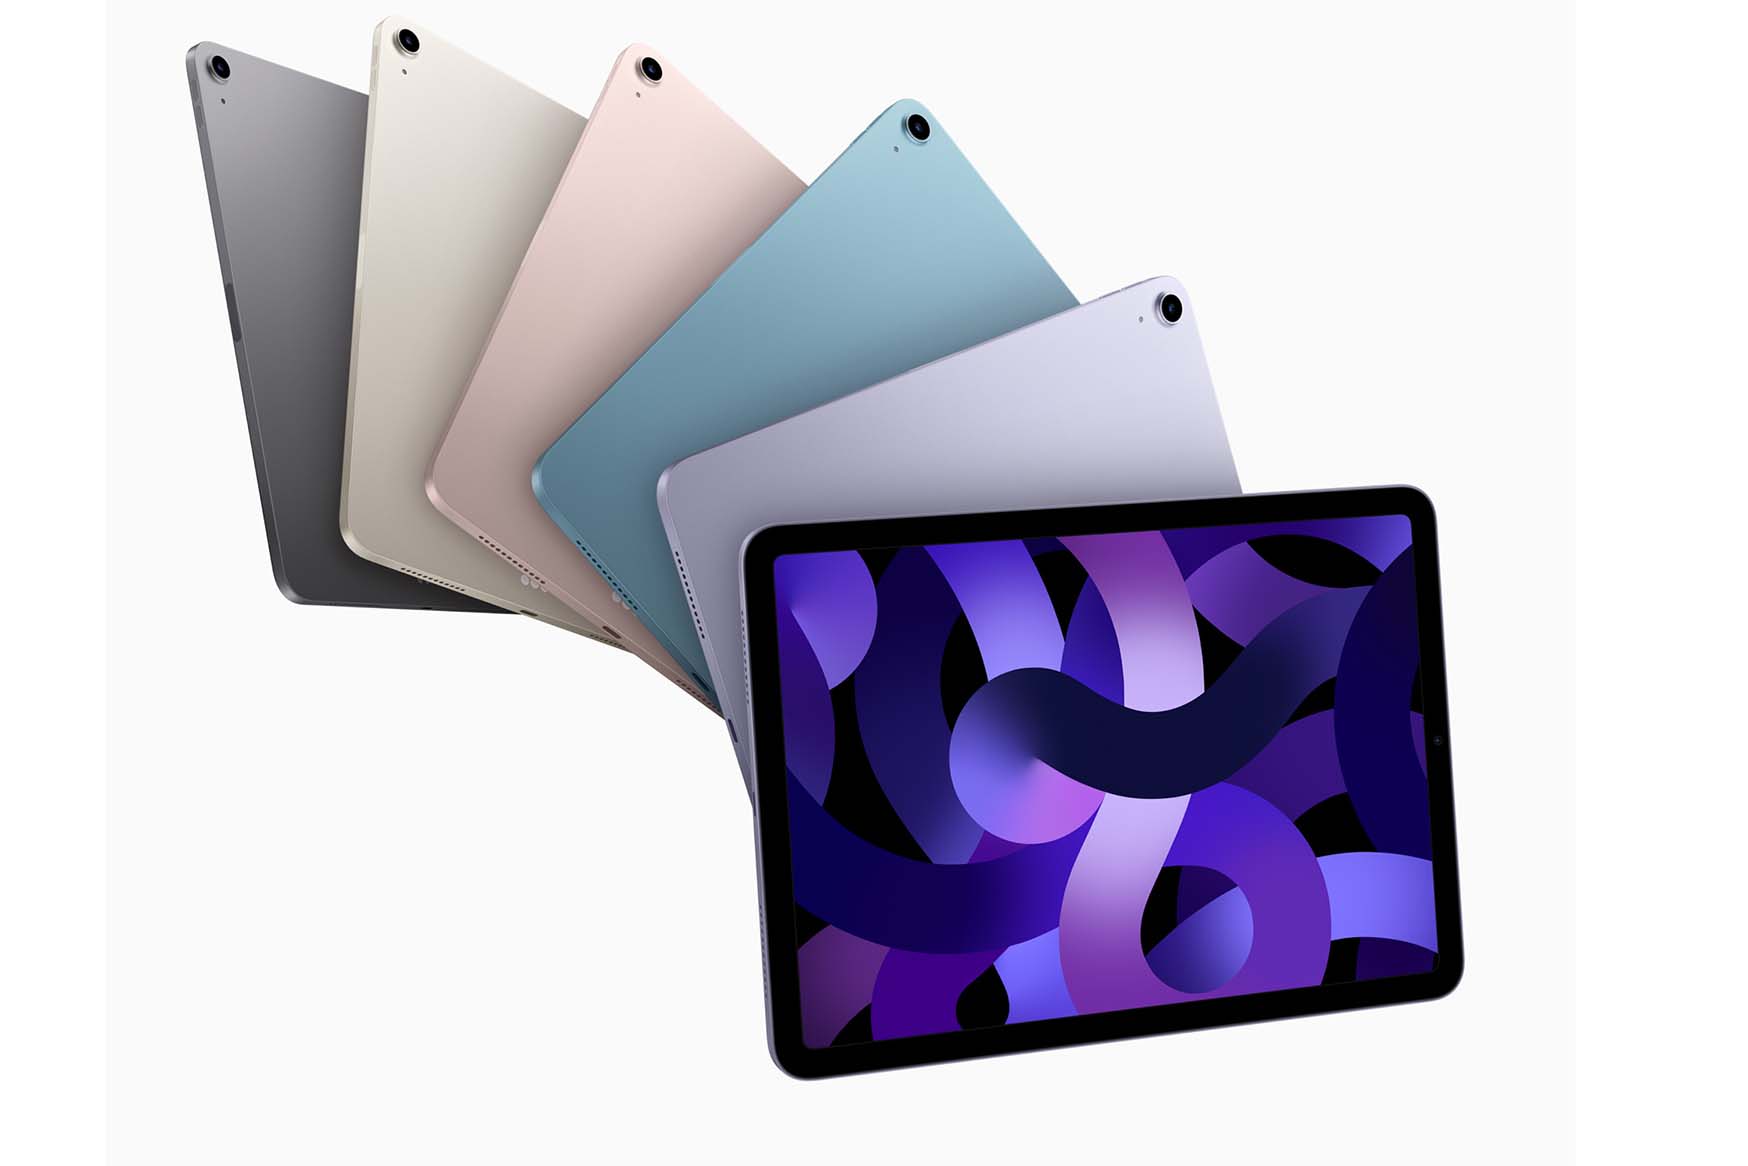 The 5G iPad Air will be available in a range of colours that, curiously, don't exactly match the colours of Apple's other computing devices.